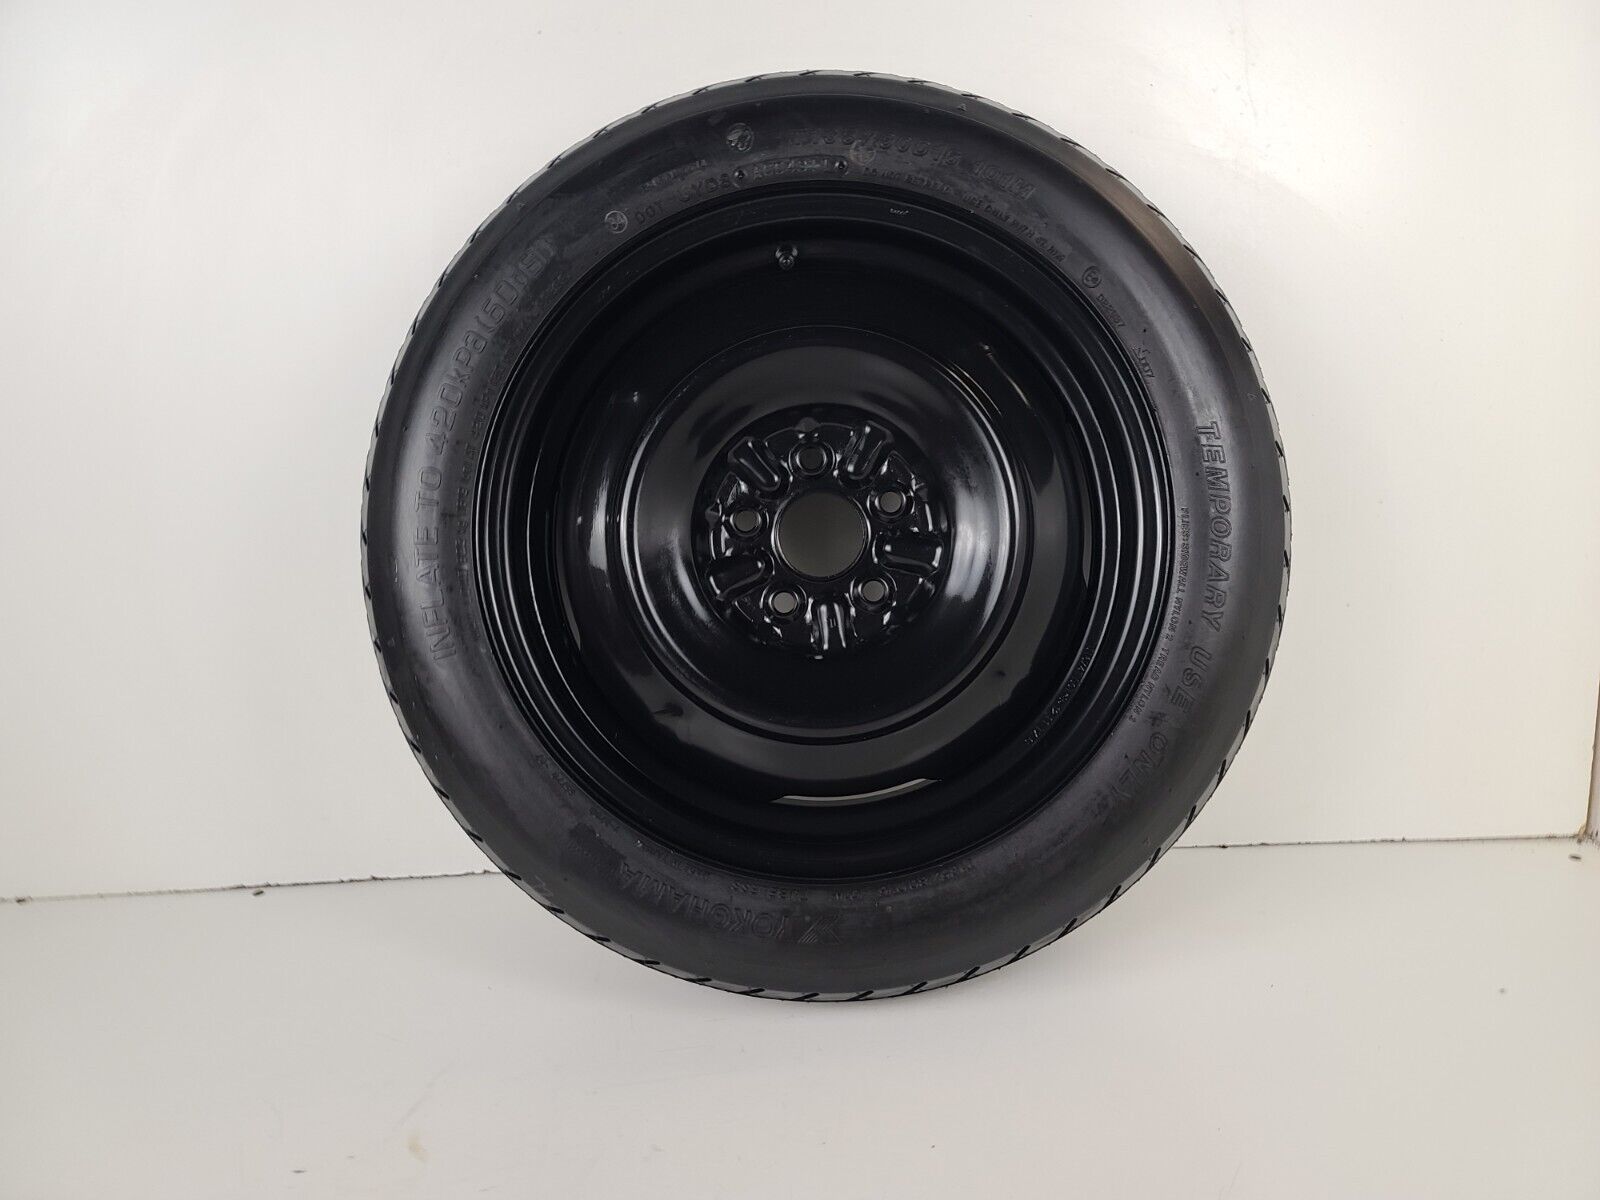 Spare Tire 16'' Fits:2003-2019 Toyota Corolla Compact Donut Oem